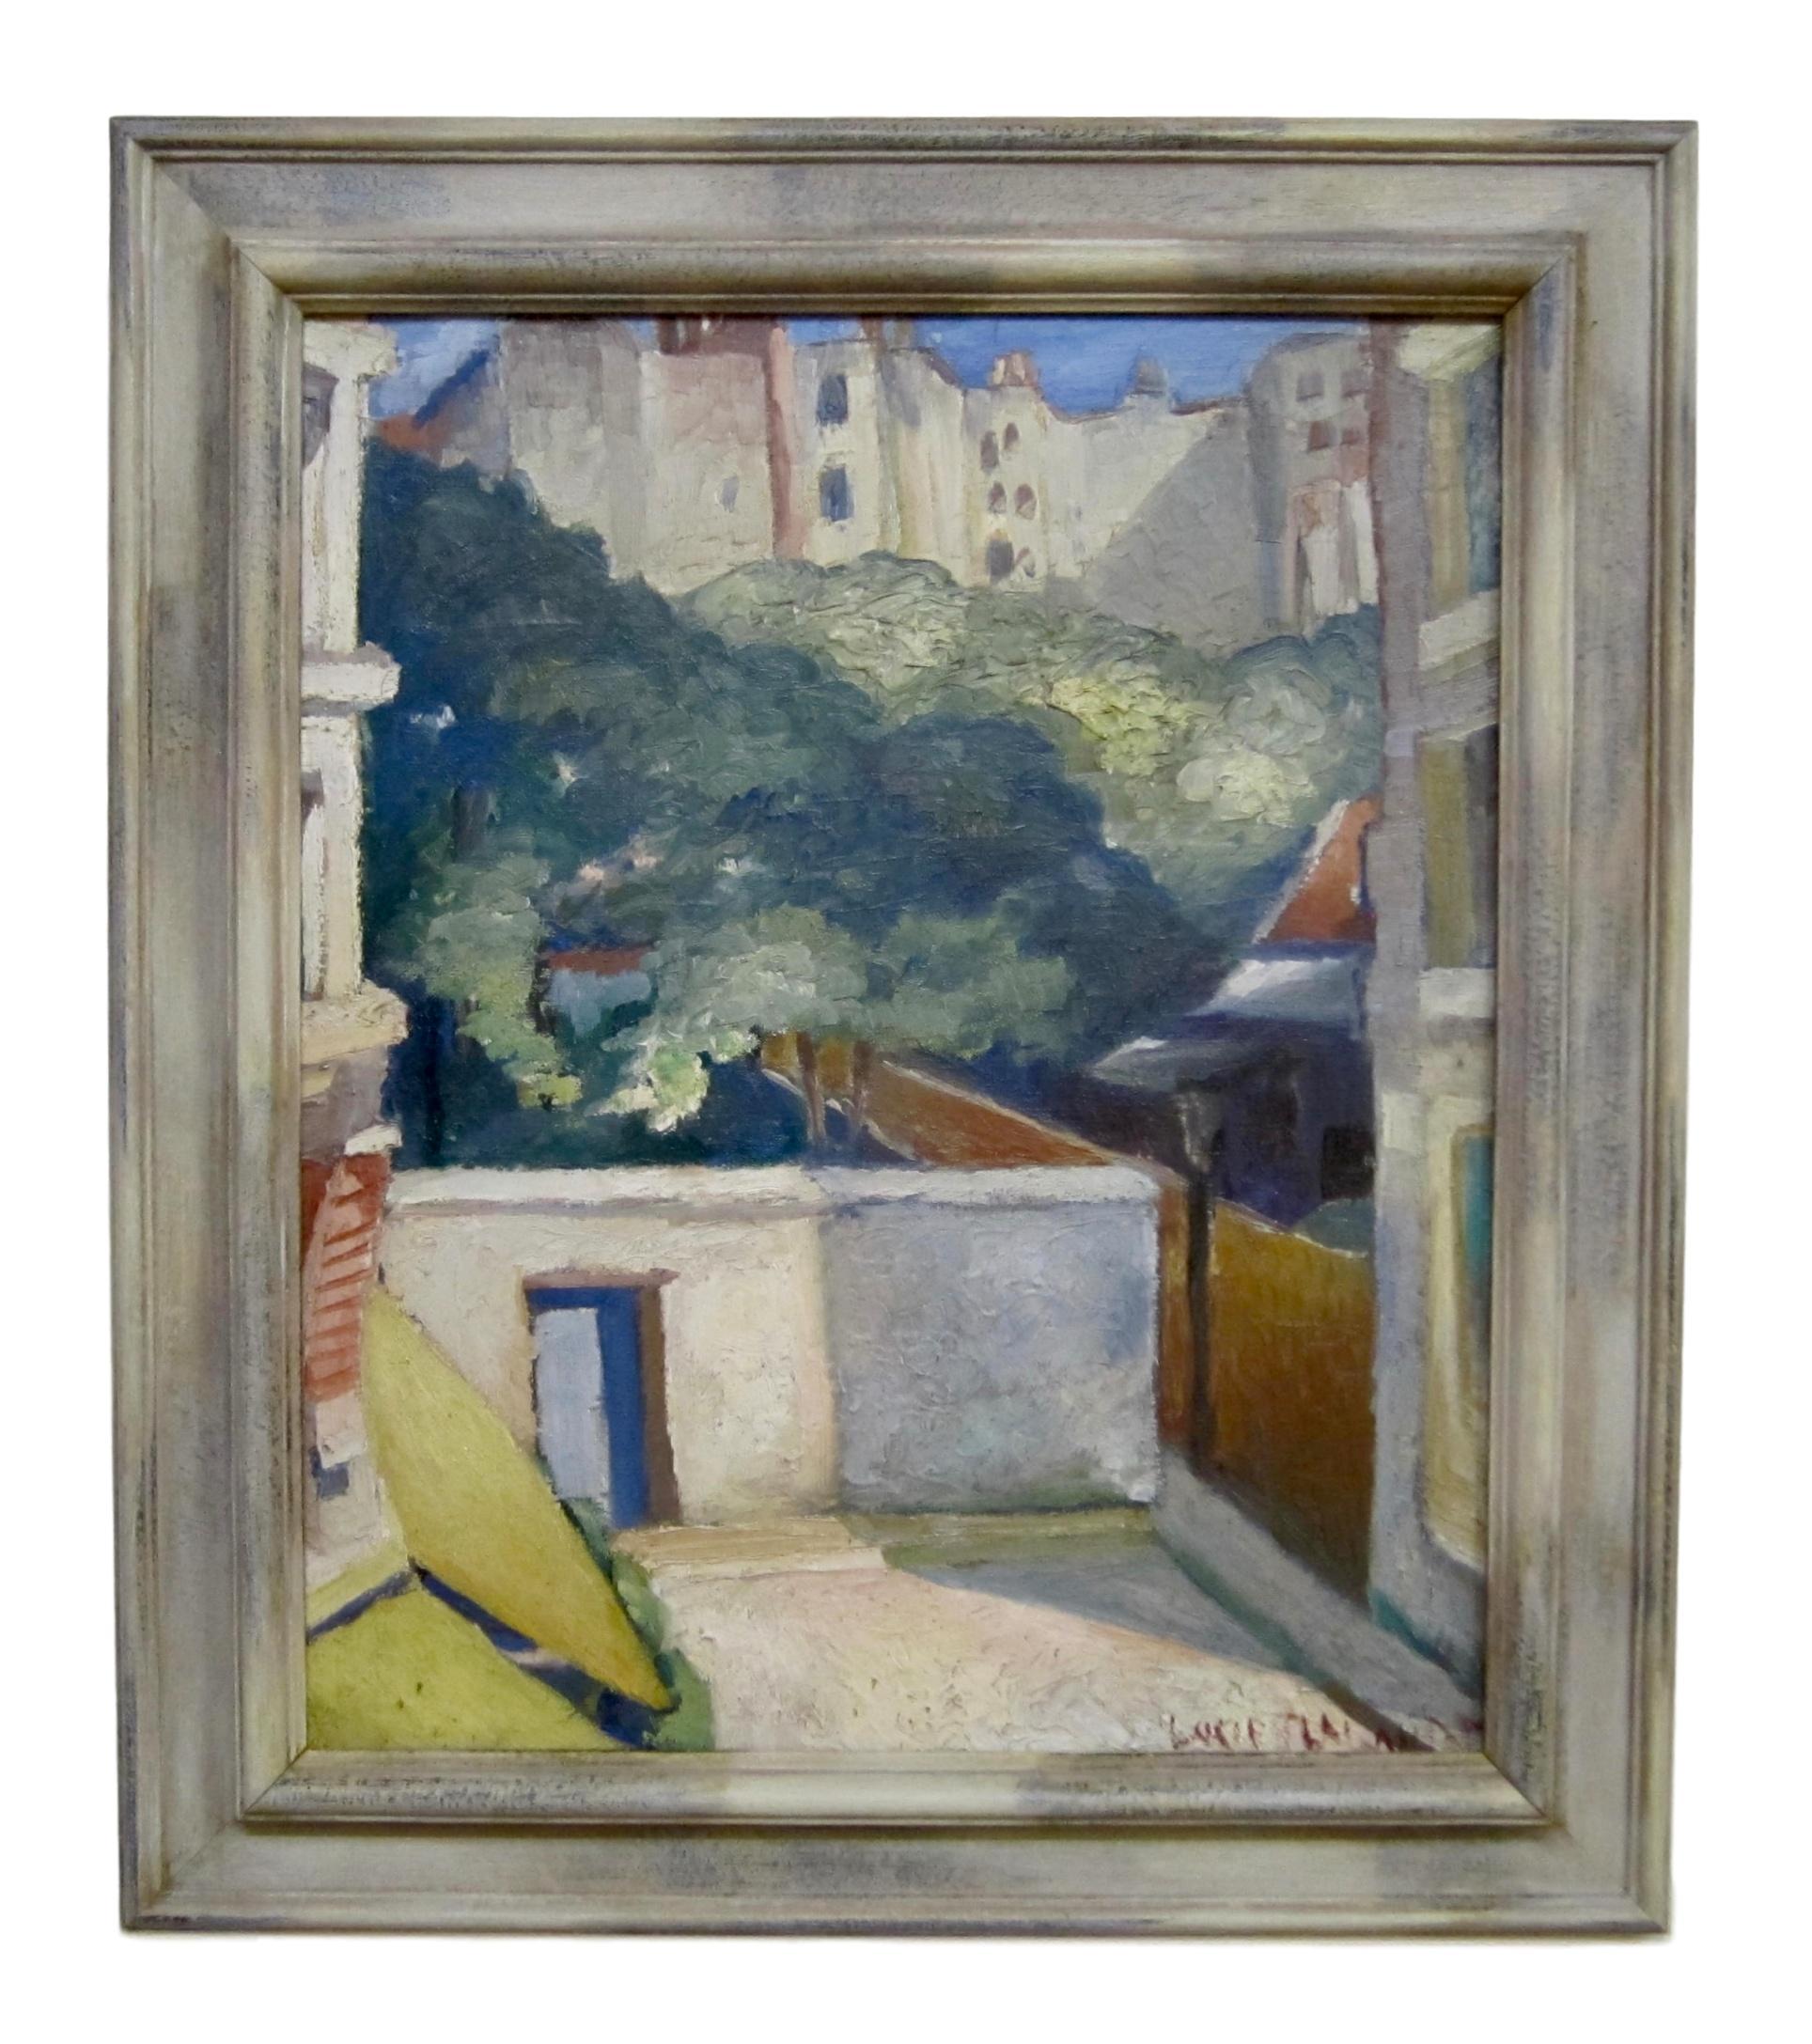 Modernist Oil Painting of a Paris Street Scene Dated 1924 by Lucien Labaudt im Angebot 1